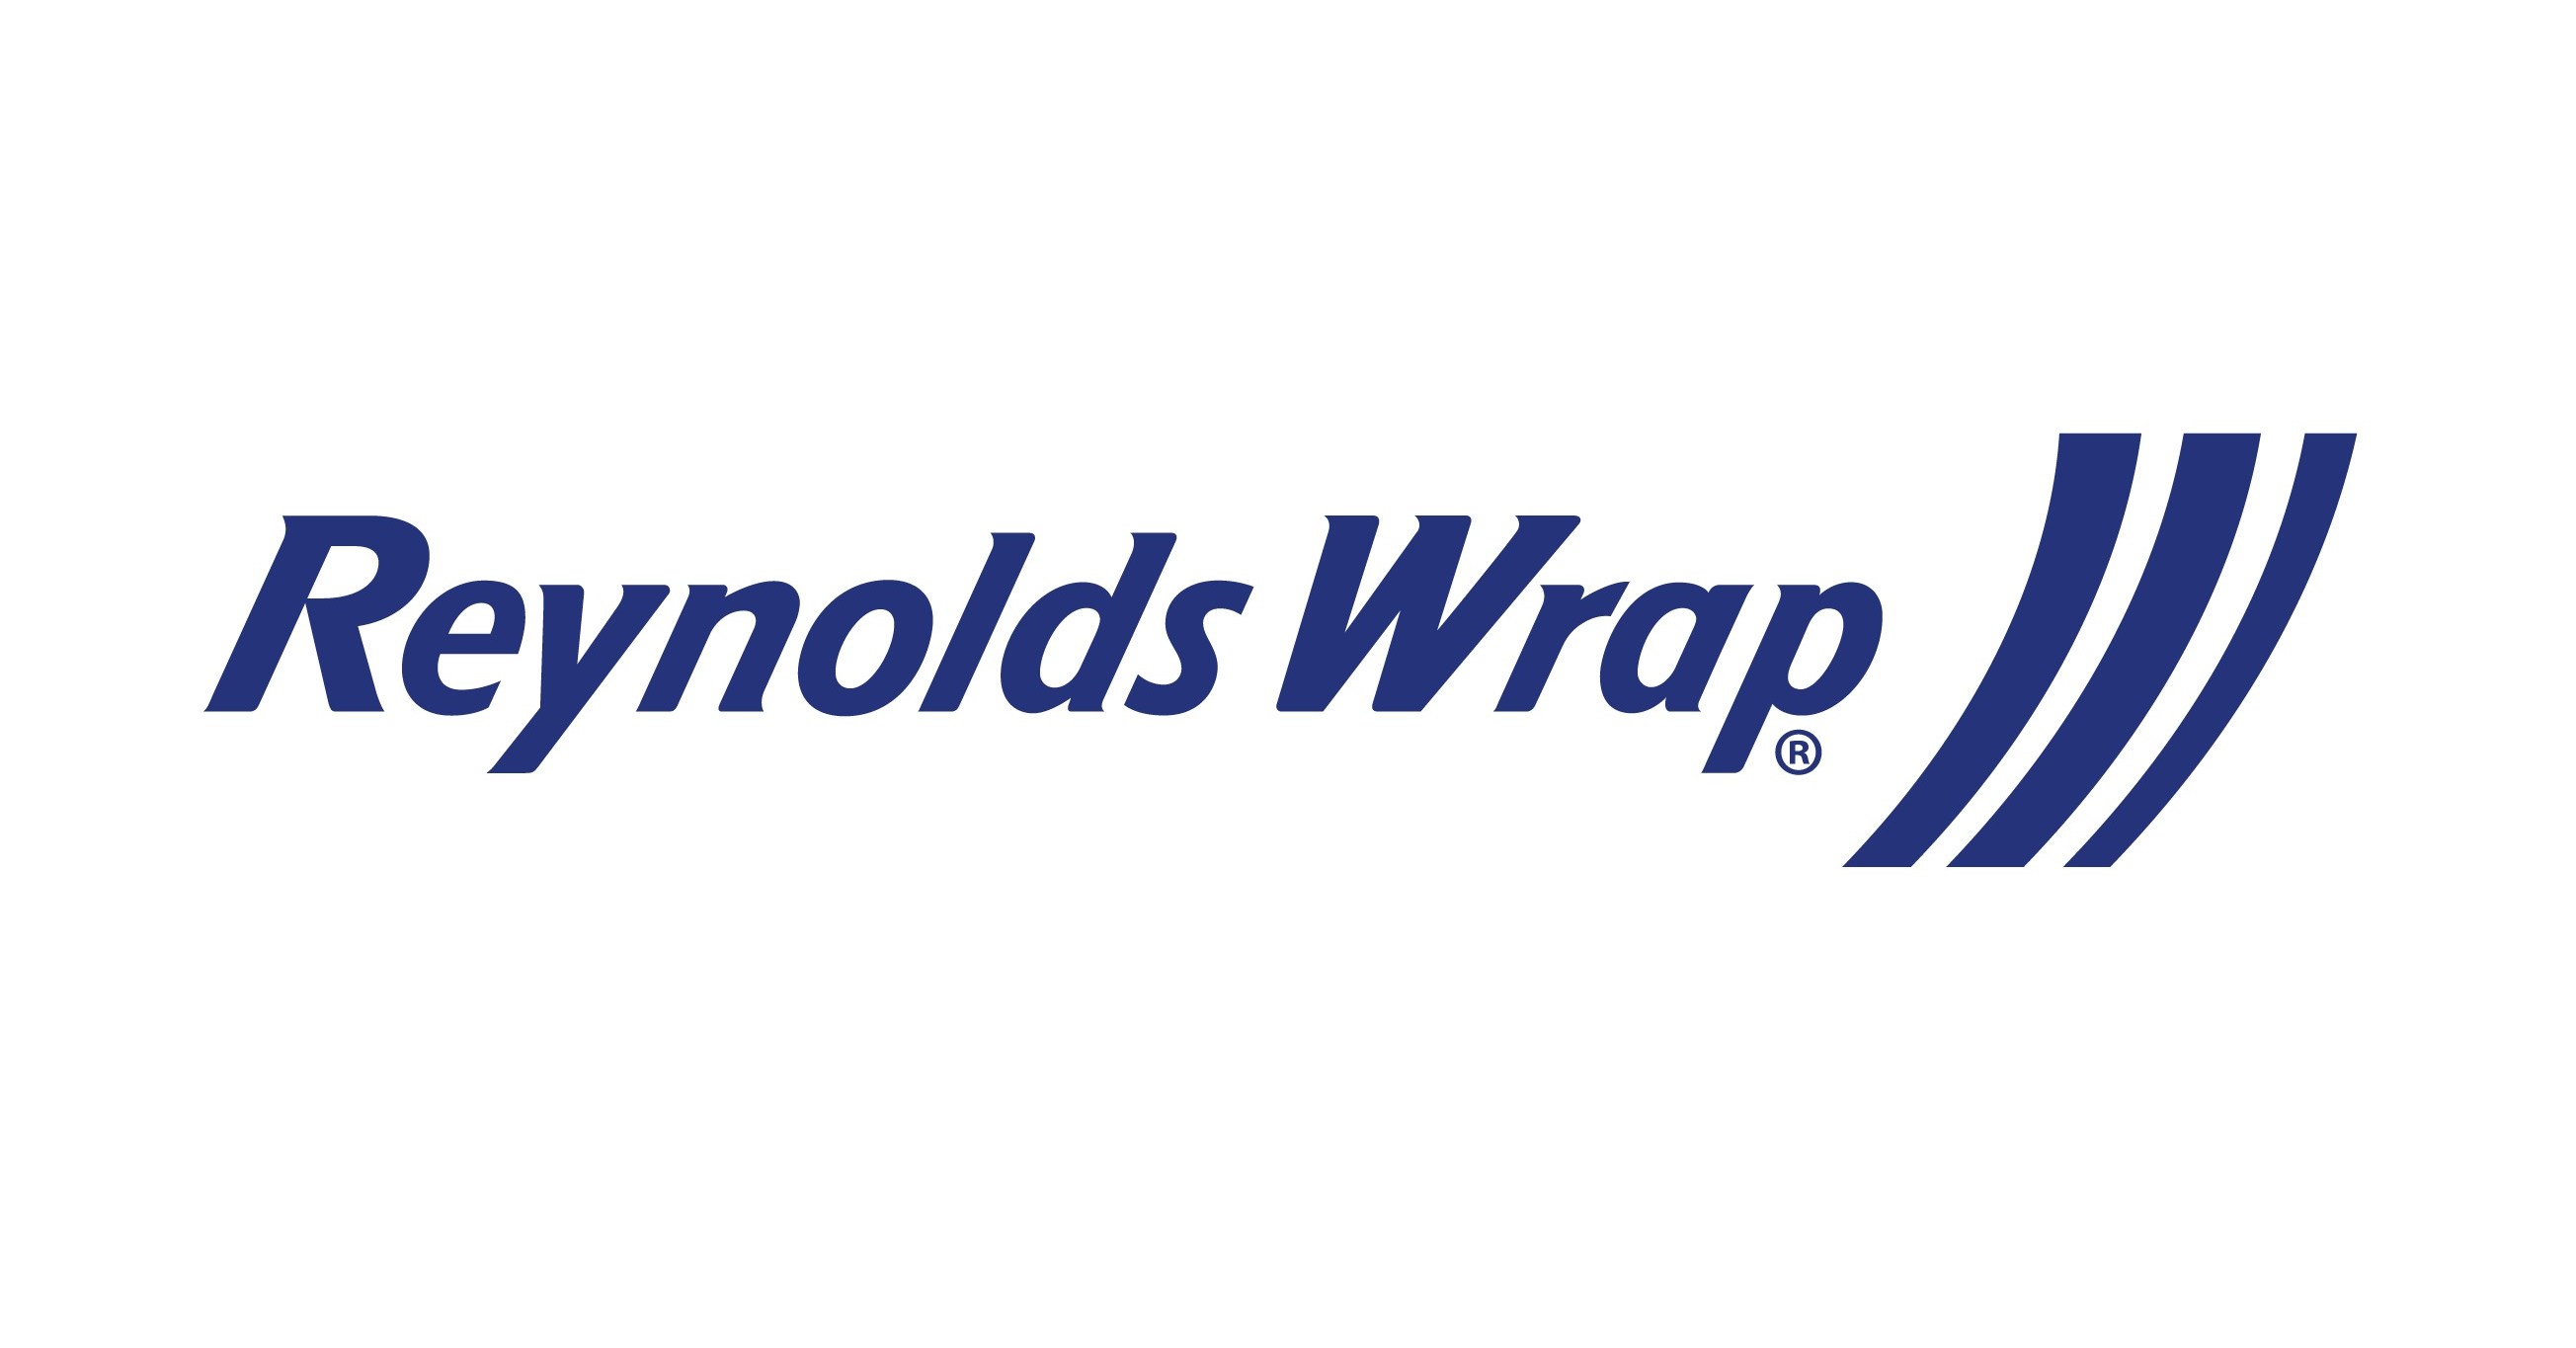 Amazing Reynolds Wrap with New Cutting Feature 